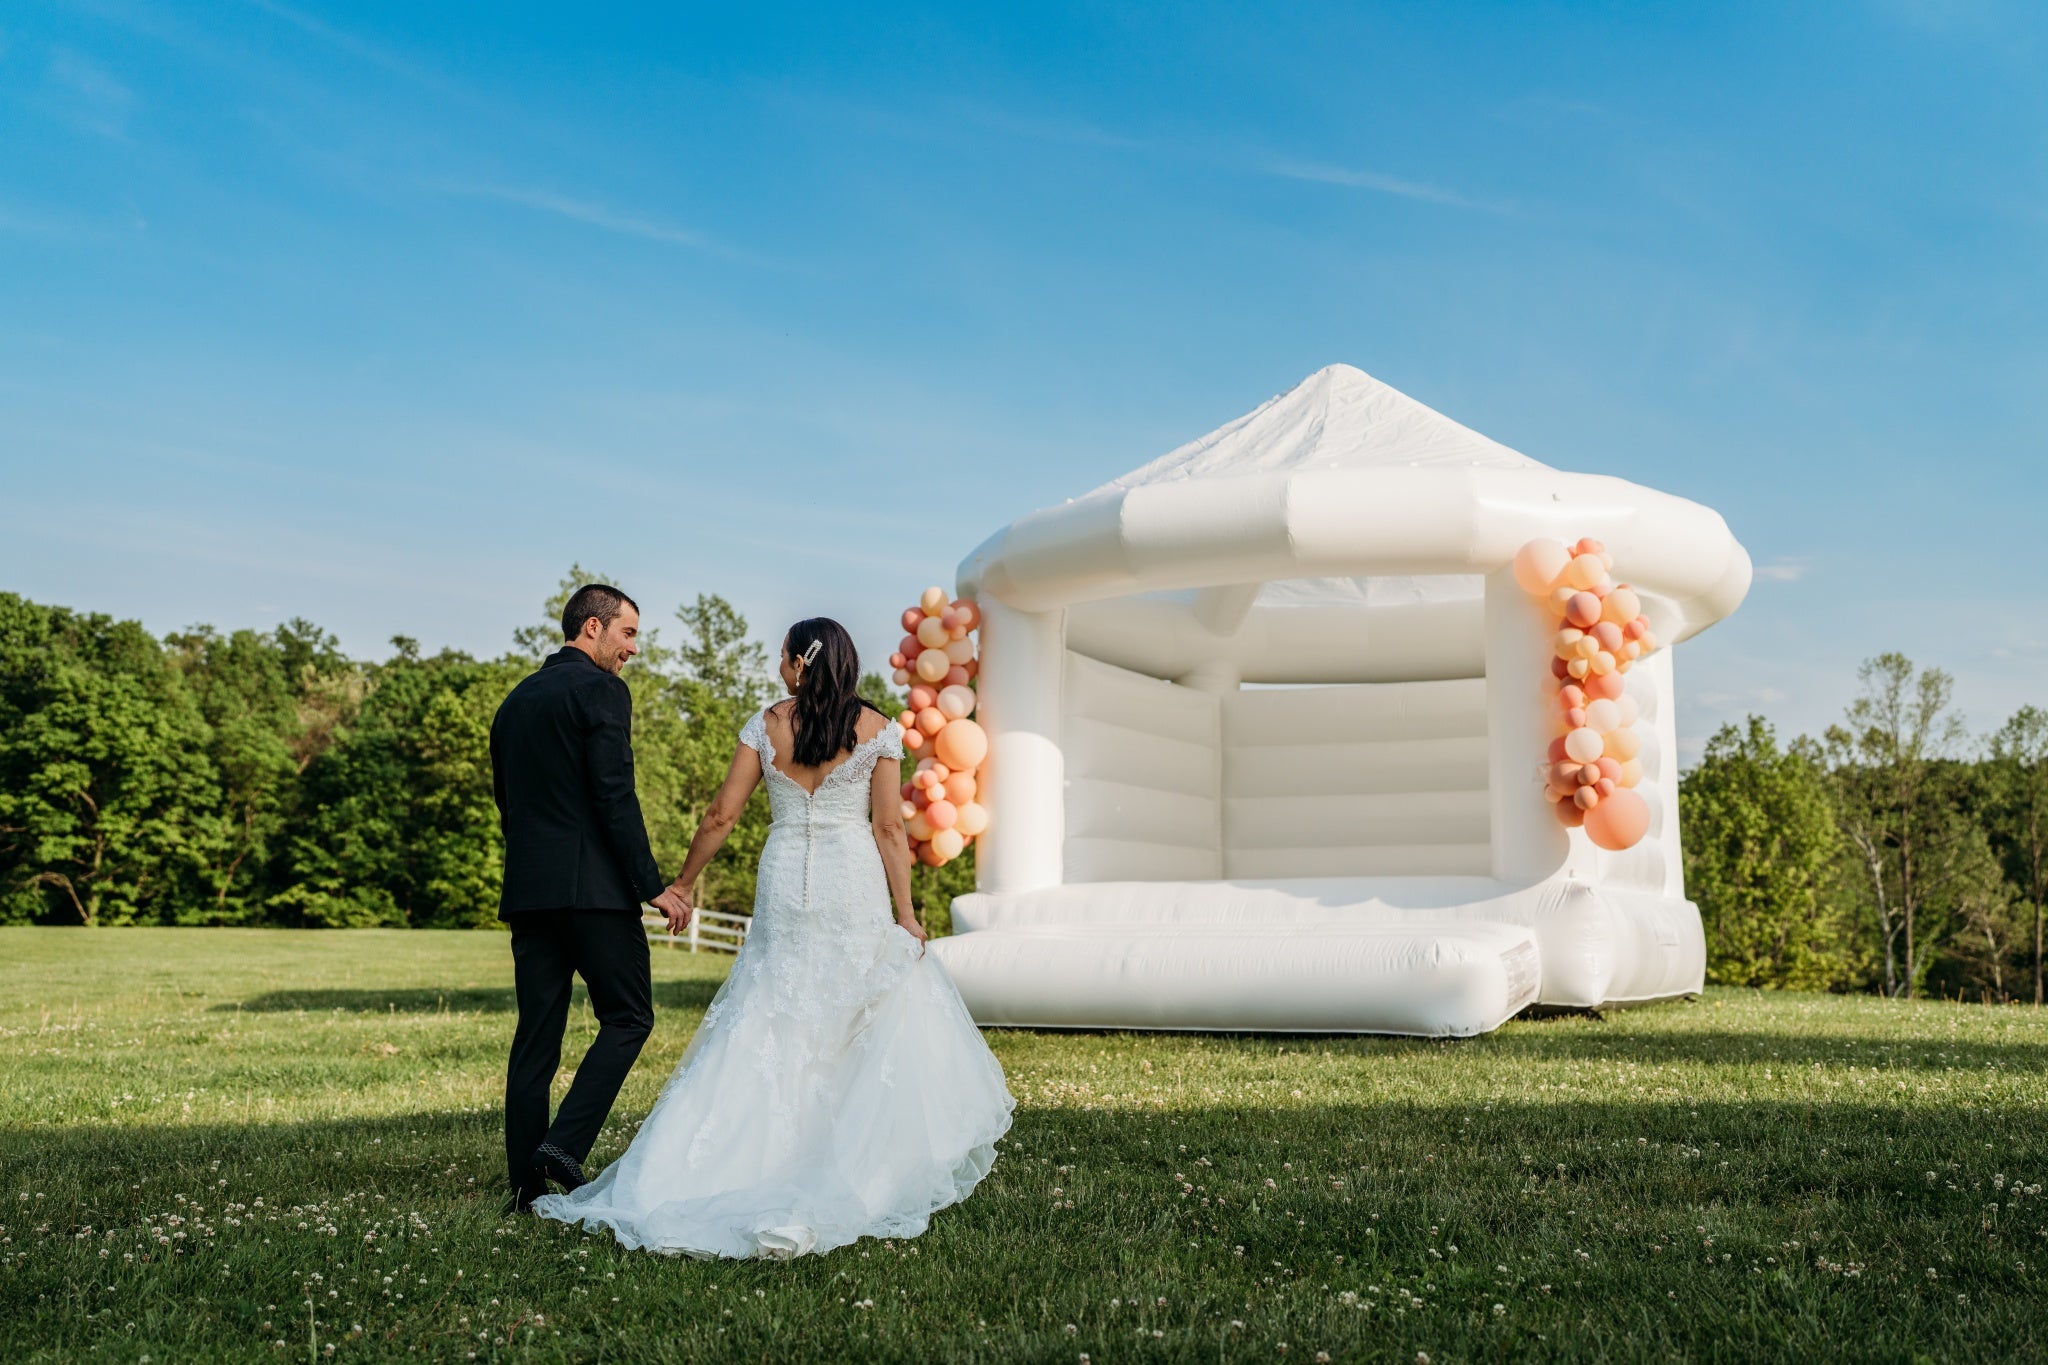 outdoor photo of a bride and groom walking towards a white castle bounce house